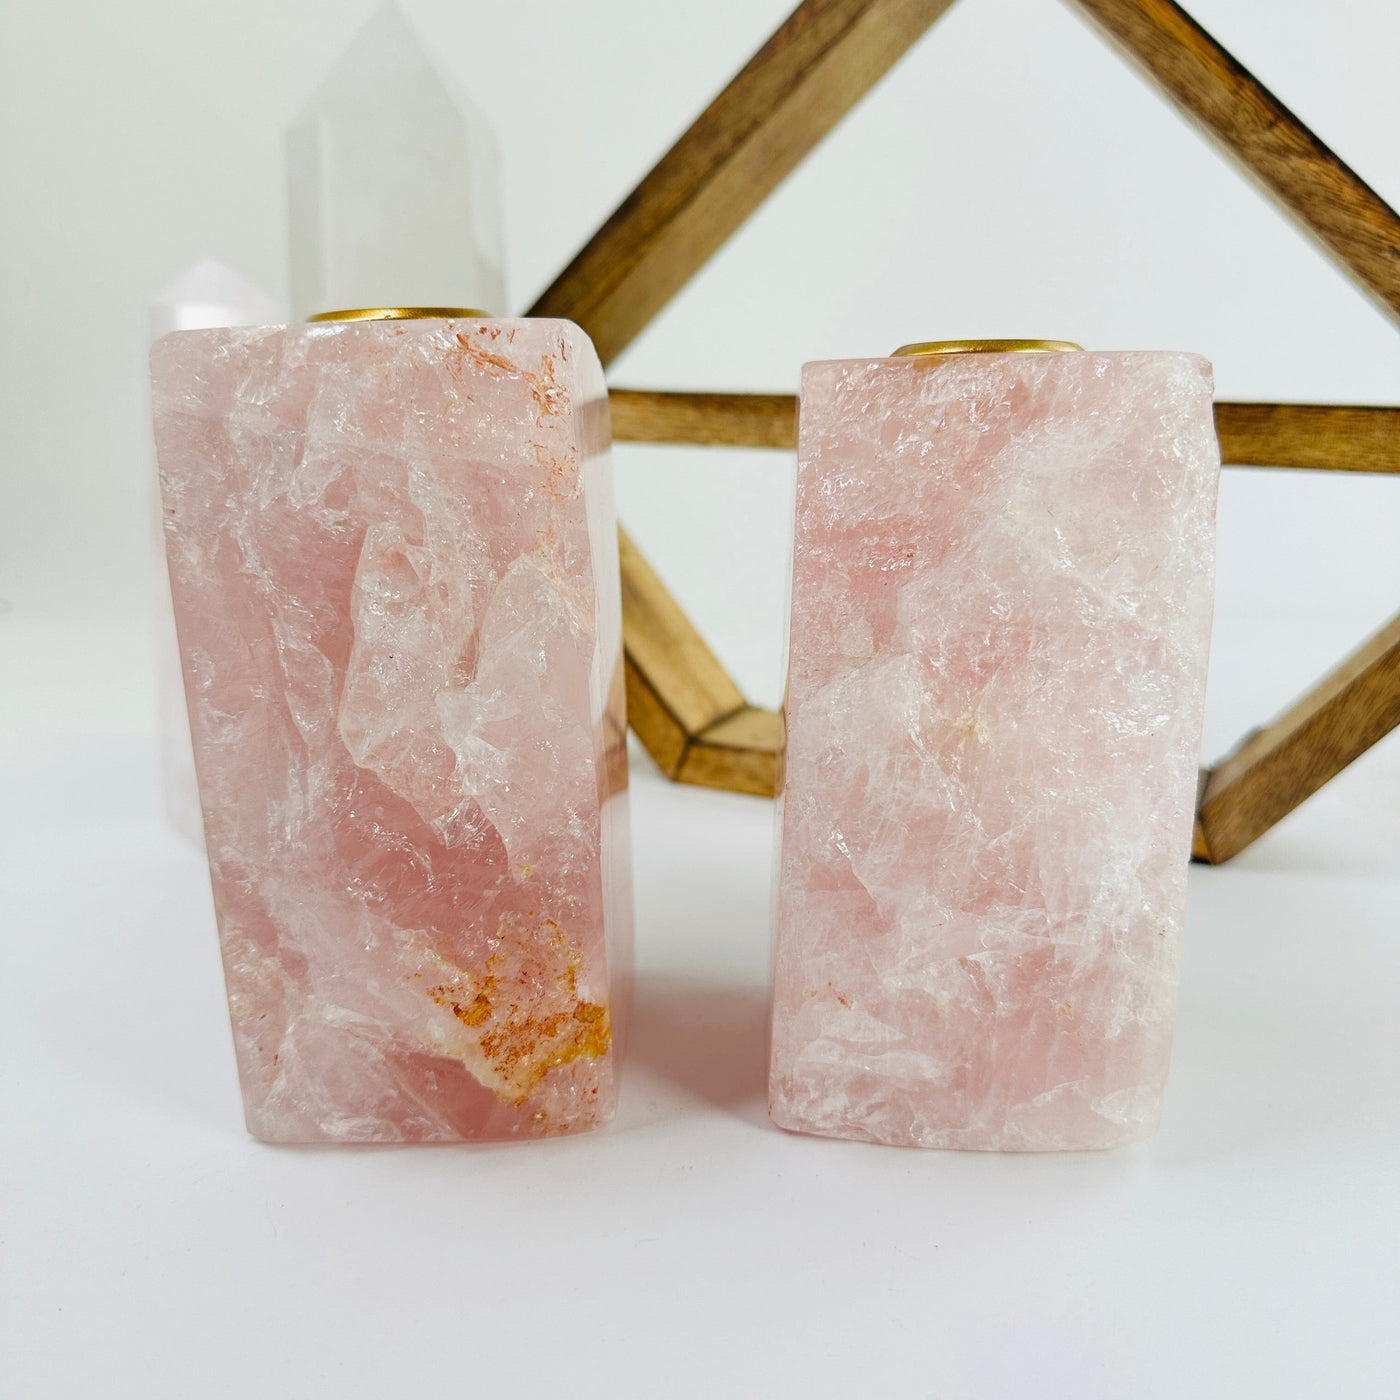 rose quartz tapered candle holder with decorations in the background